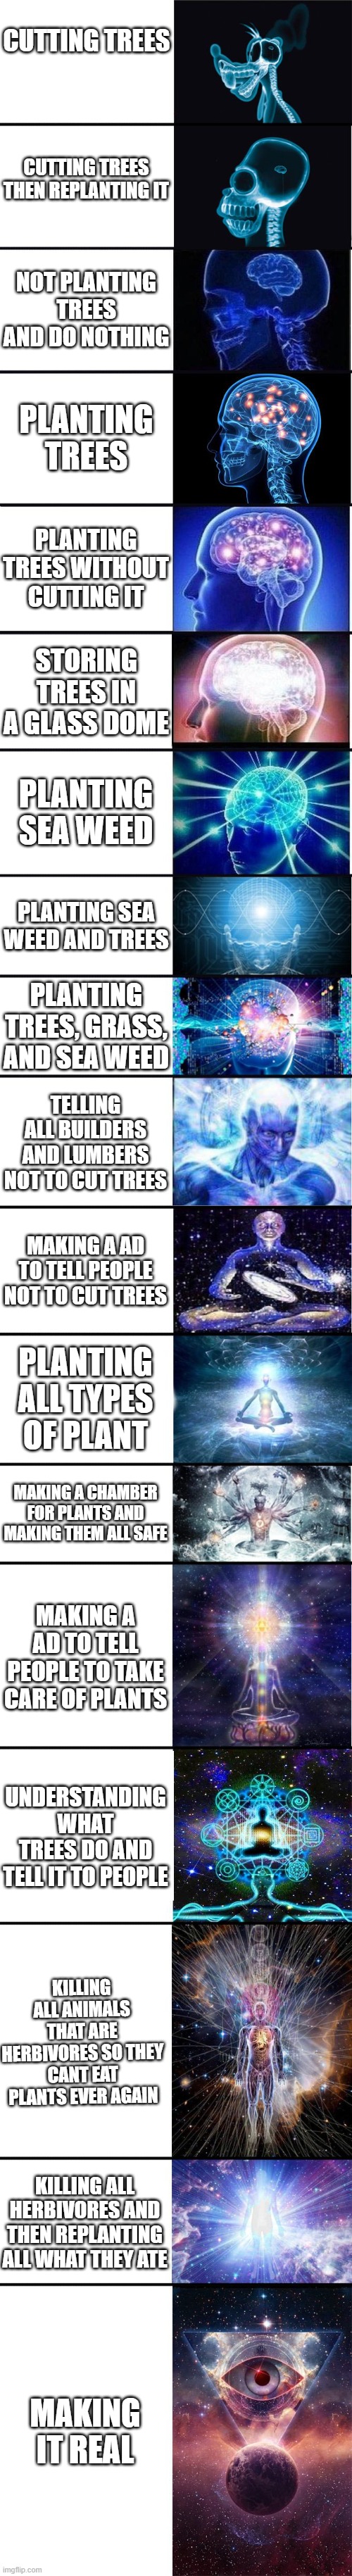 Plants Make Oxygen #DontBeVegan #TeamTrees #EatHerbivoresMeat | CUTTING TREES; CUTTING TREES THEN REPLANTING IT; NOT PLANTING TREES AND DO NOTHING; PLANTING TREES; PLANTING TREES WITHOUT CUTTING IT; STORING TREES IN A GLASS DOME; PLANTING SEA WEED; PLANTING SEA WEED AND TREES; PLANTING TREES, GRASS, AND SEA WEED; TELLING ALL BUILDERS AND LUMBERS NOT TO CUT TREES; MAKING A AD TO TELL PEOPLE NOT TO CUT TREES; PLANTING ALL TYPES OF PLANT; MAKING A CHAMBER FOR PLANTS AND MAKING THEM ALL SAFE; MAKING A AD TO TELL PEOPLE TO TAKE CARE OF PLANTS; UNDERSTANDING WHAT TREES DO AND TELL IT TO PEOPLE; KILLING ALL ANIMALS THAT ARE HERBIVORES SO THEY CANT EAT PLANTS EVER AGAIN; KILLING ALL HERBIVORES AND THEN REPLANTING ALL WHAT THEY ATE; MAKING IT REAL | image tagged in expanding brain 9001 | made w/ Imgflip meme maker